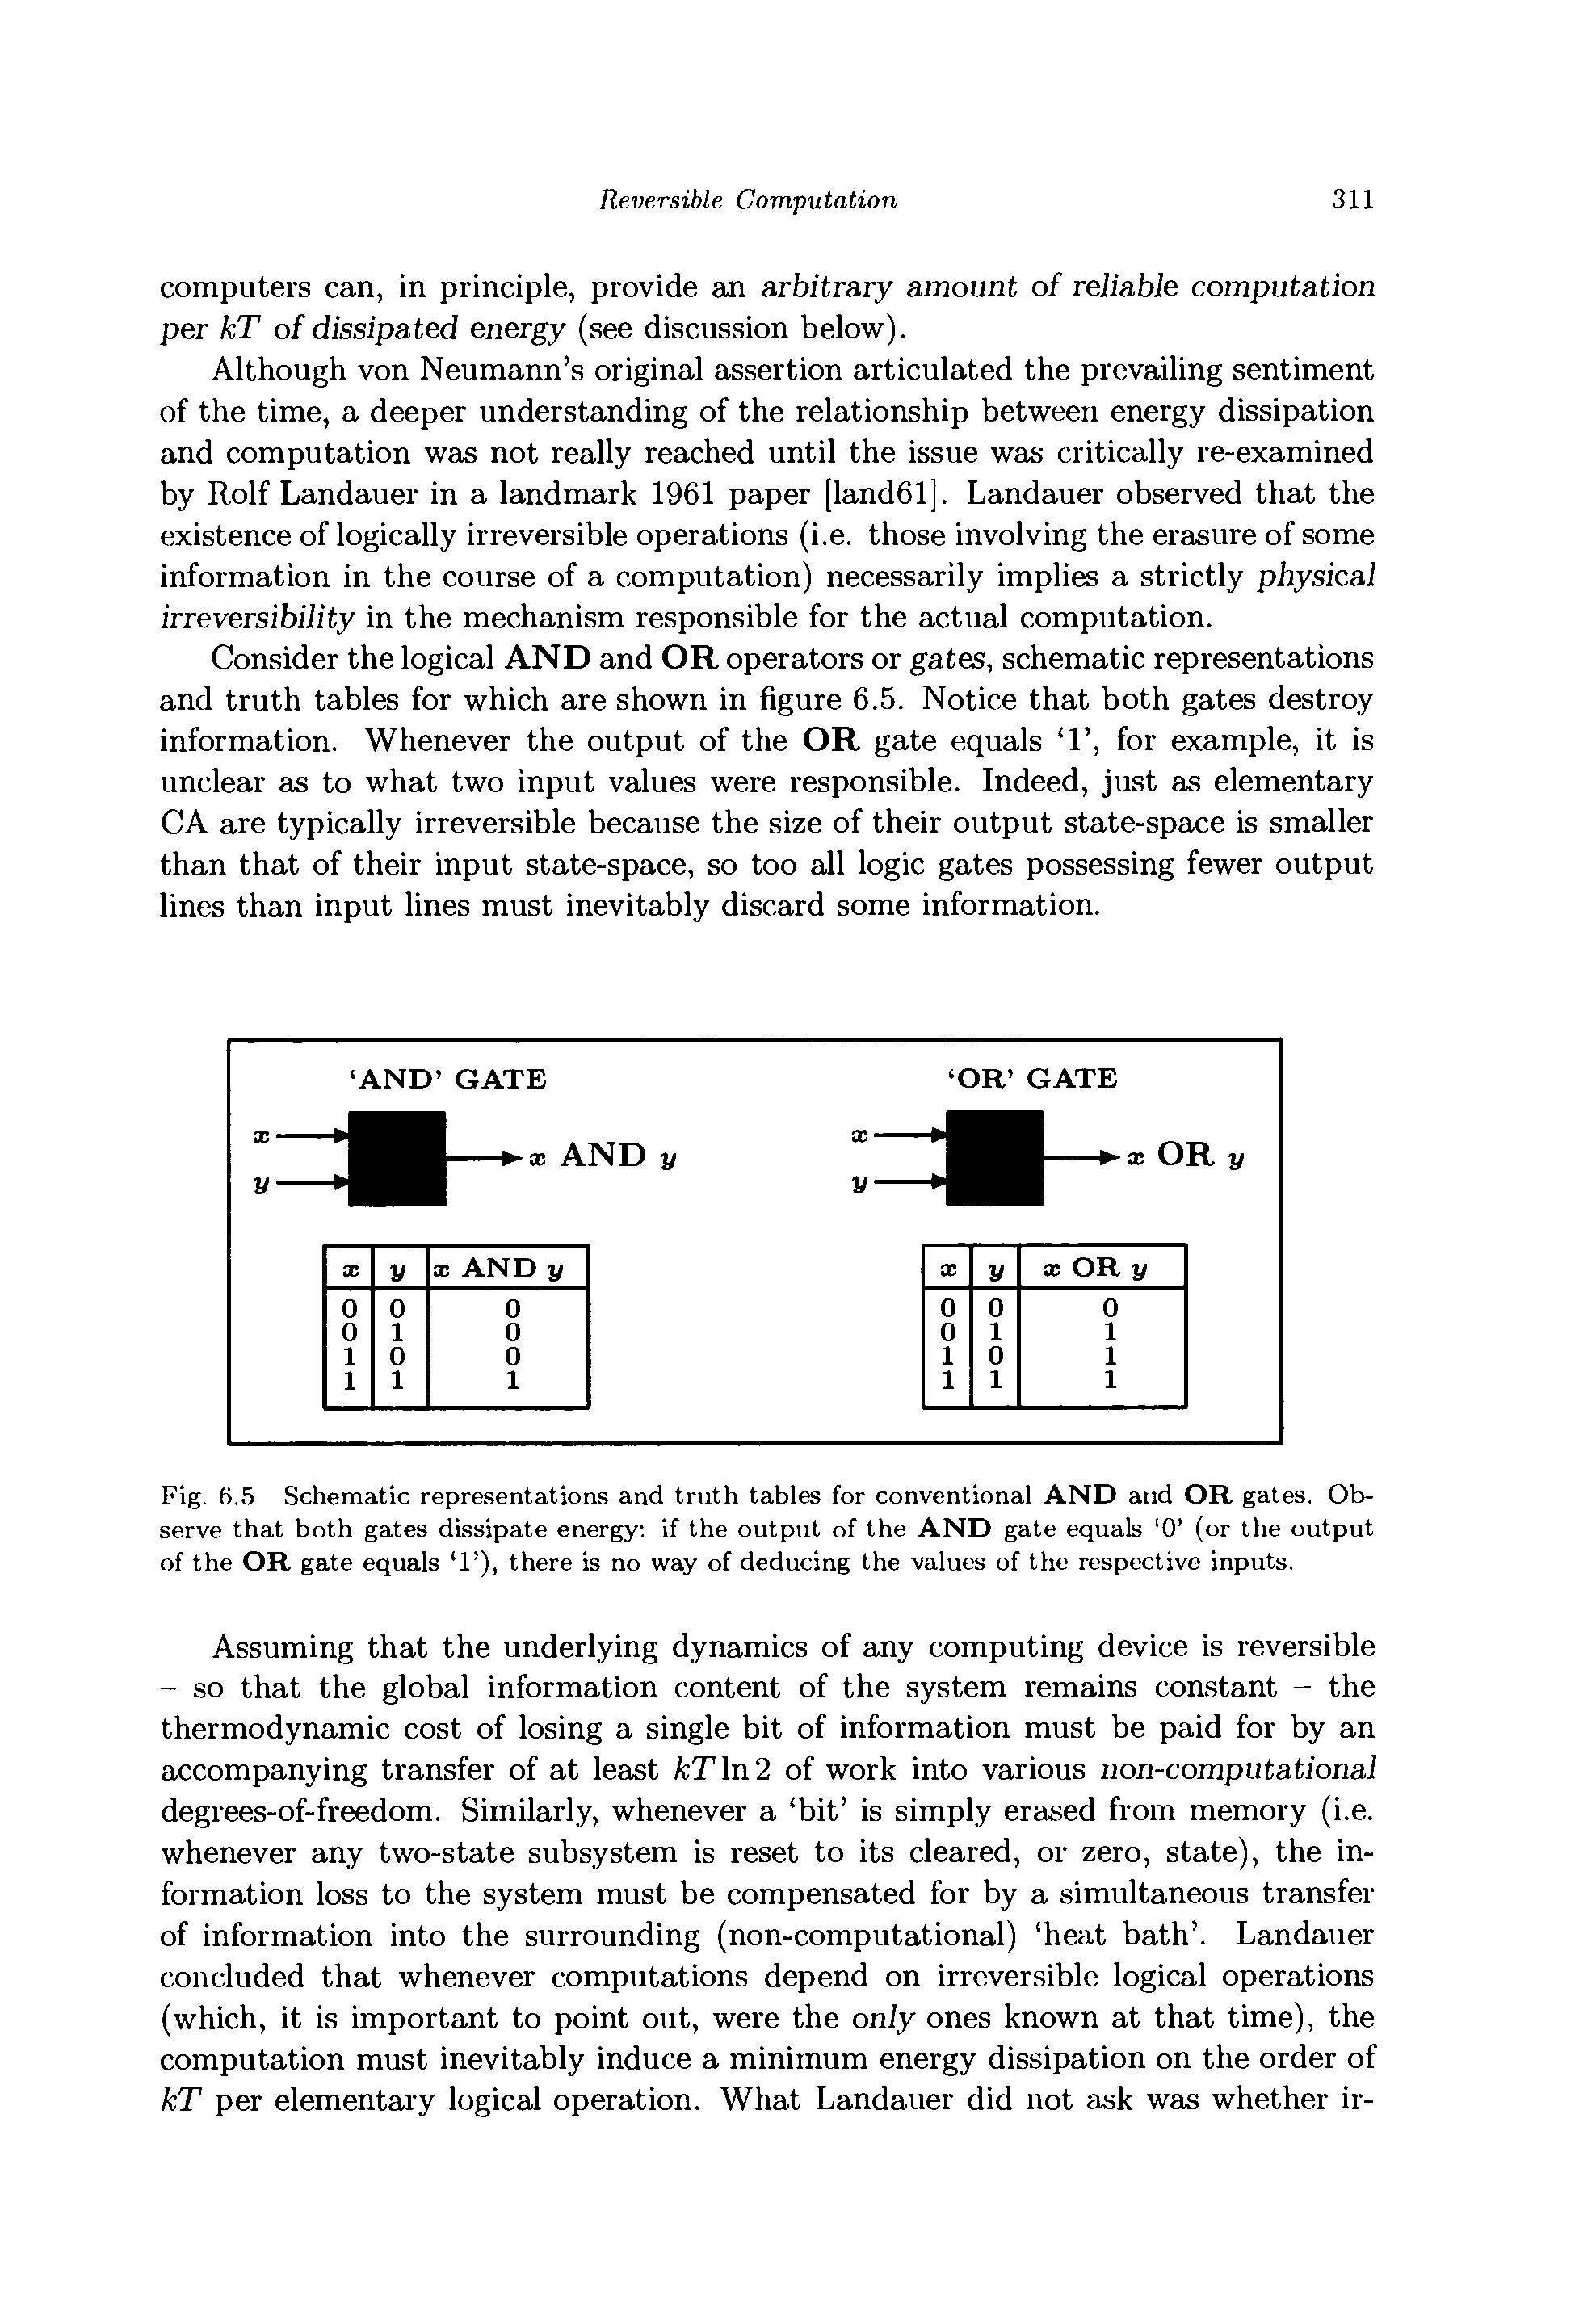 Fig. 6.5 Schematic representations and truth tables for conventional AND and OR gates. Observe that both gates dissipate energy if the output of the AND gate equals 0 (or the output of the OR gate equals 1 ), there is no way of deducing the values of the respective inputs.